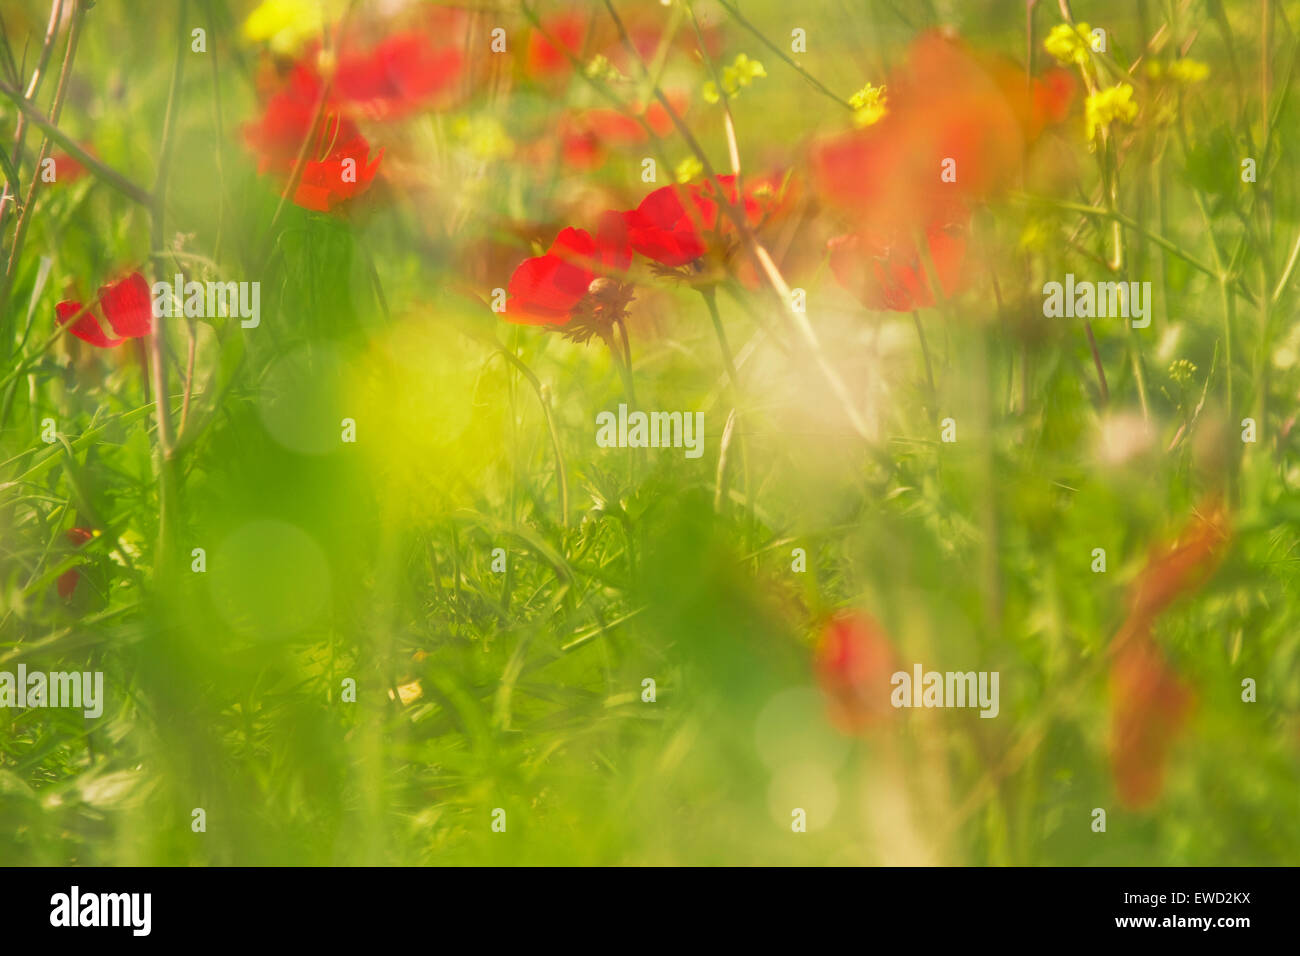 Abstract blurry background of sunset meadow with red anemones (sunset light toning, sunray effect, bokeh effect, blur) Stock Photo